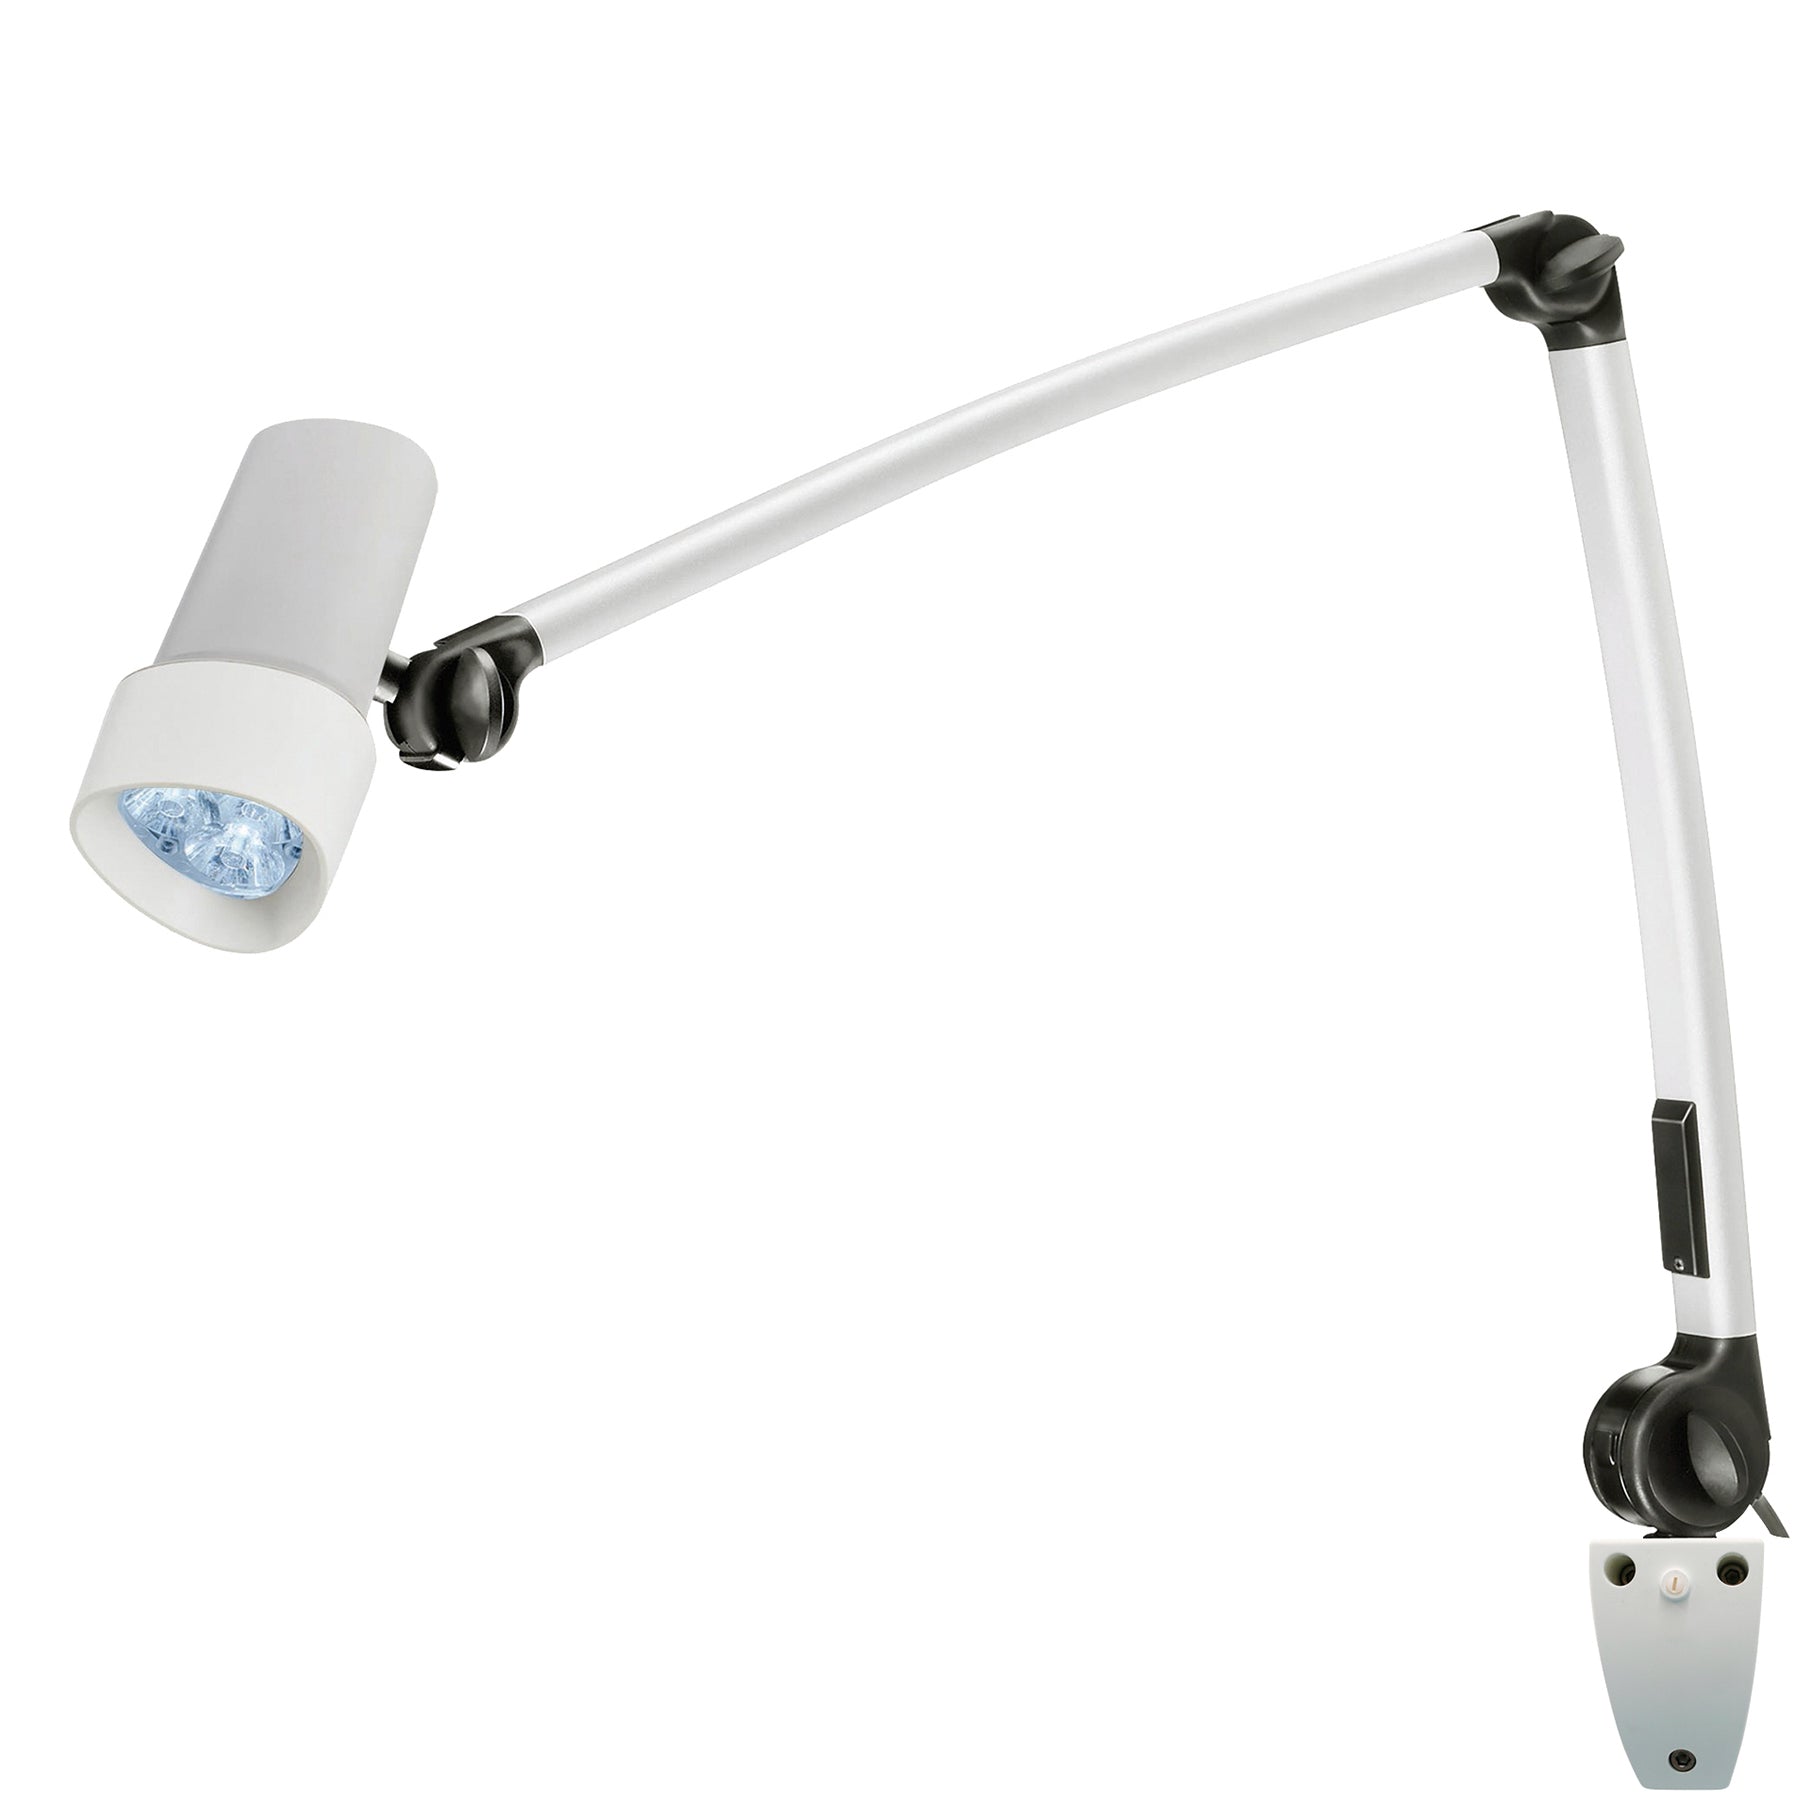 Derungs D15994920 Halux LED N30-1 P F1, Reading, Double Arm - Wall Mount